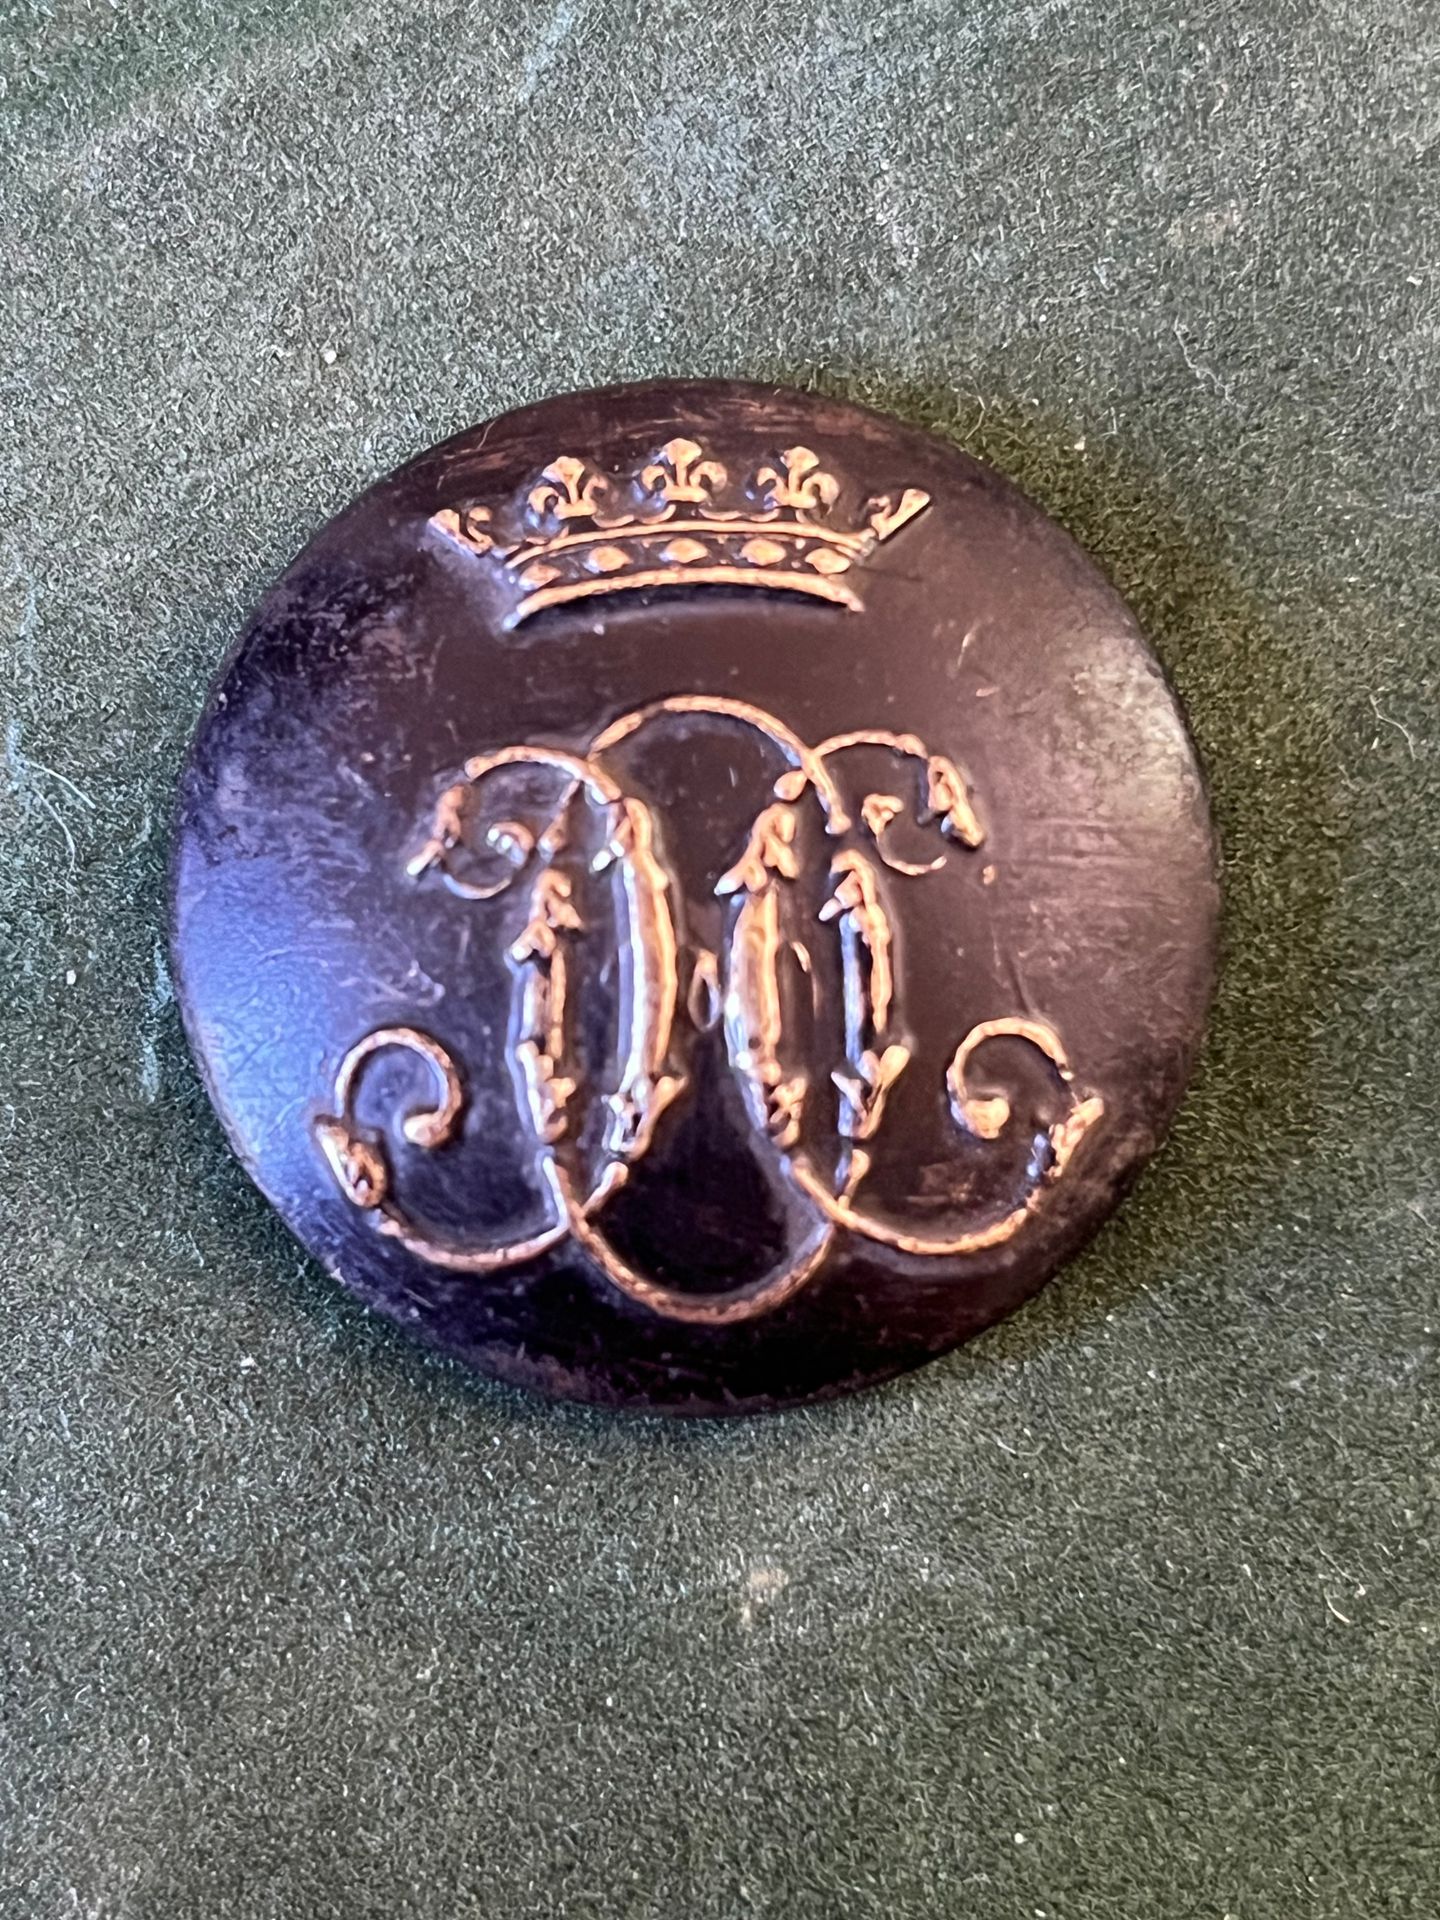 Null Button for the crew of H.R.H. The Duke of Aumale (1874-1886)